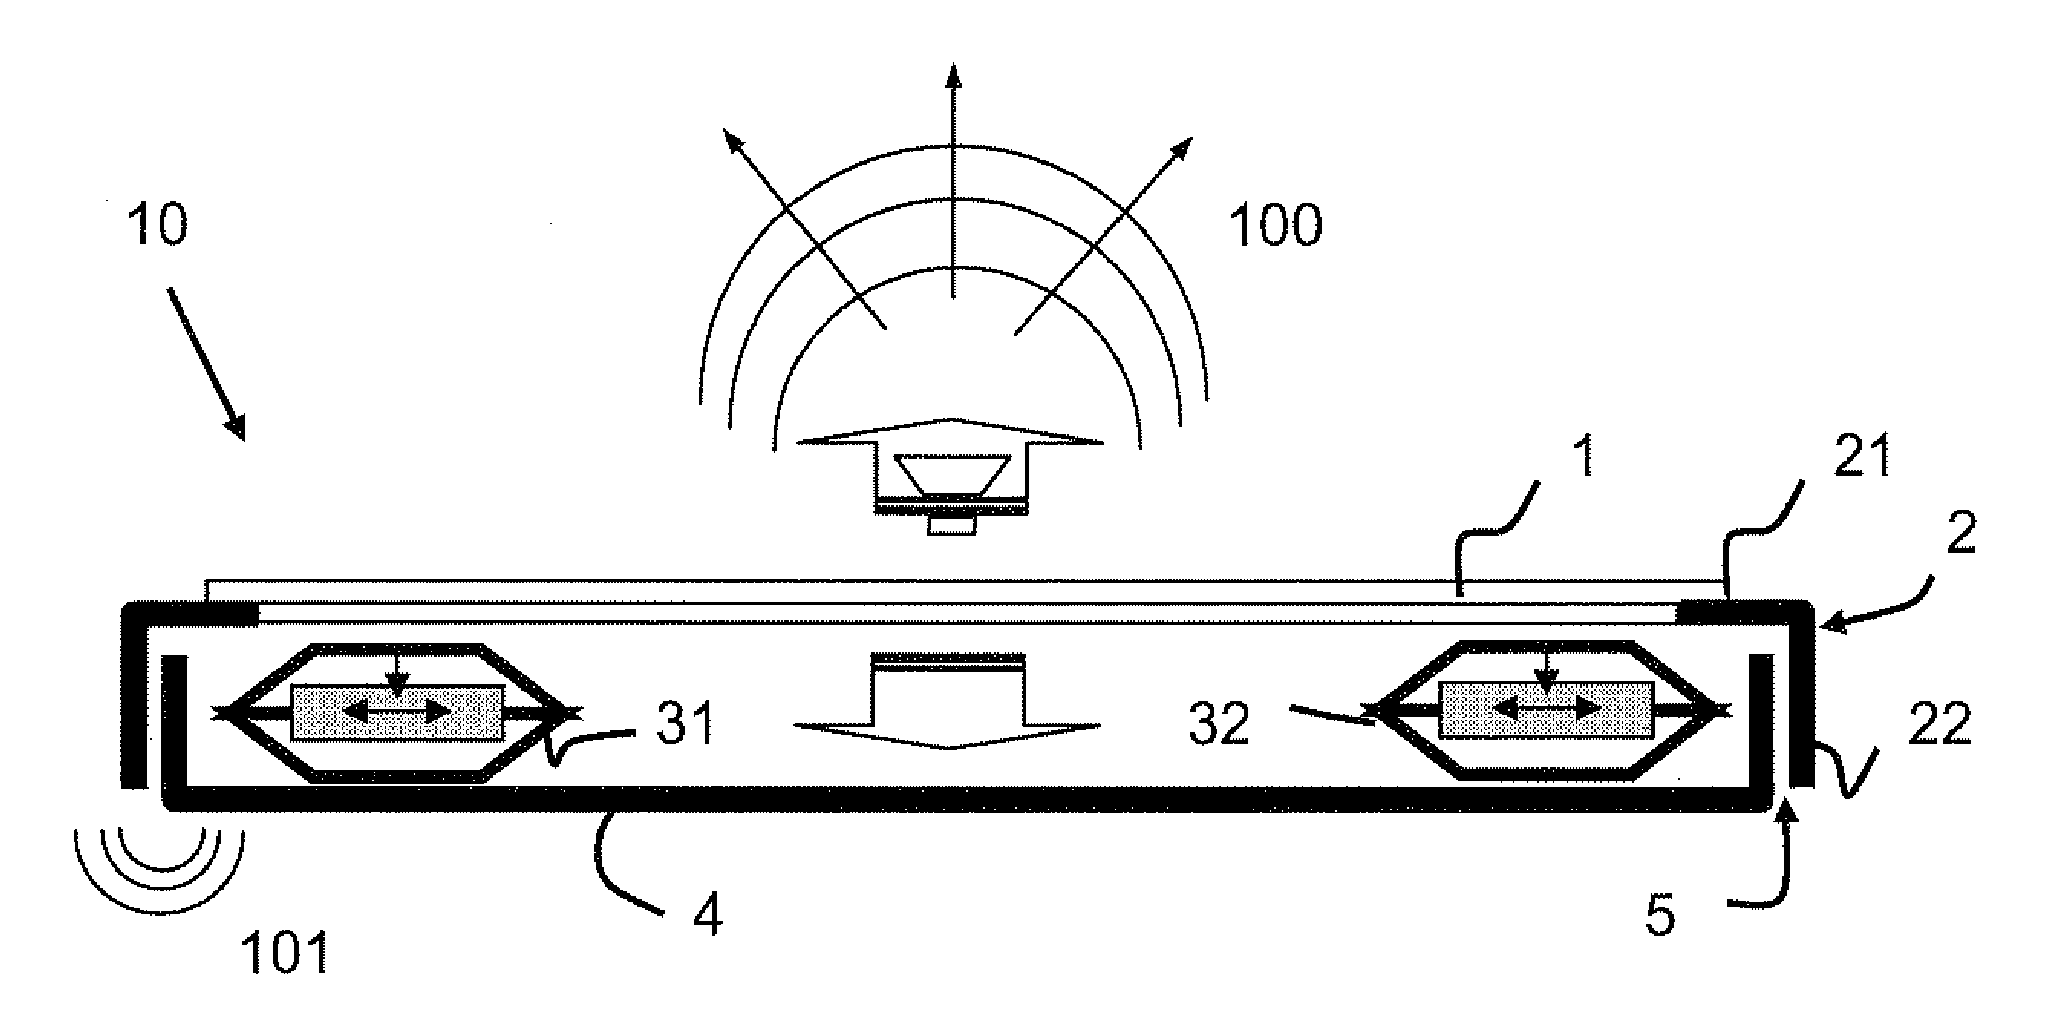 Haptic interaction device and method for generating haptic and sound effects